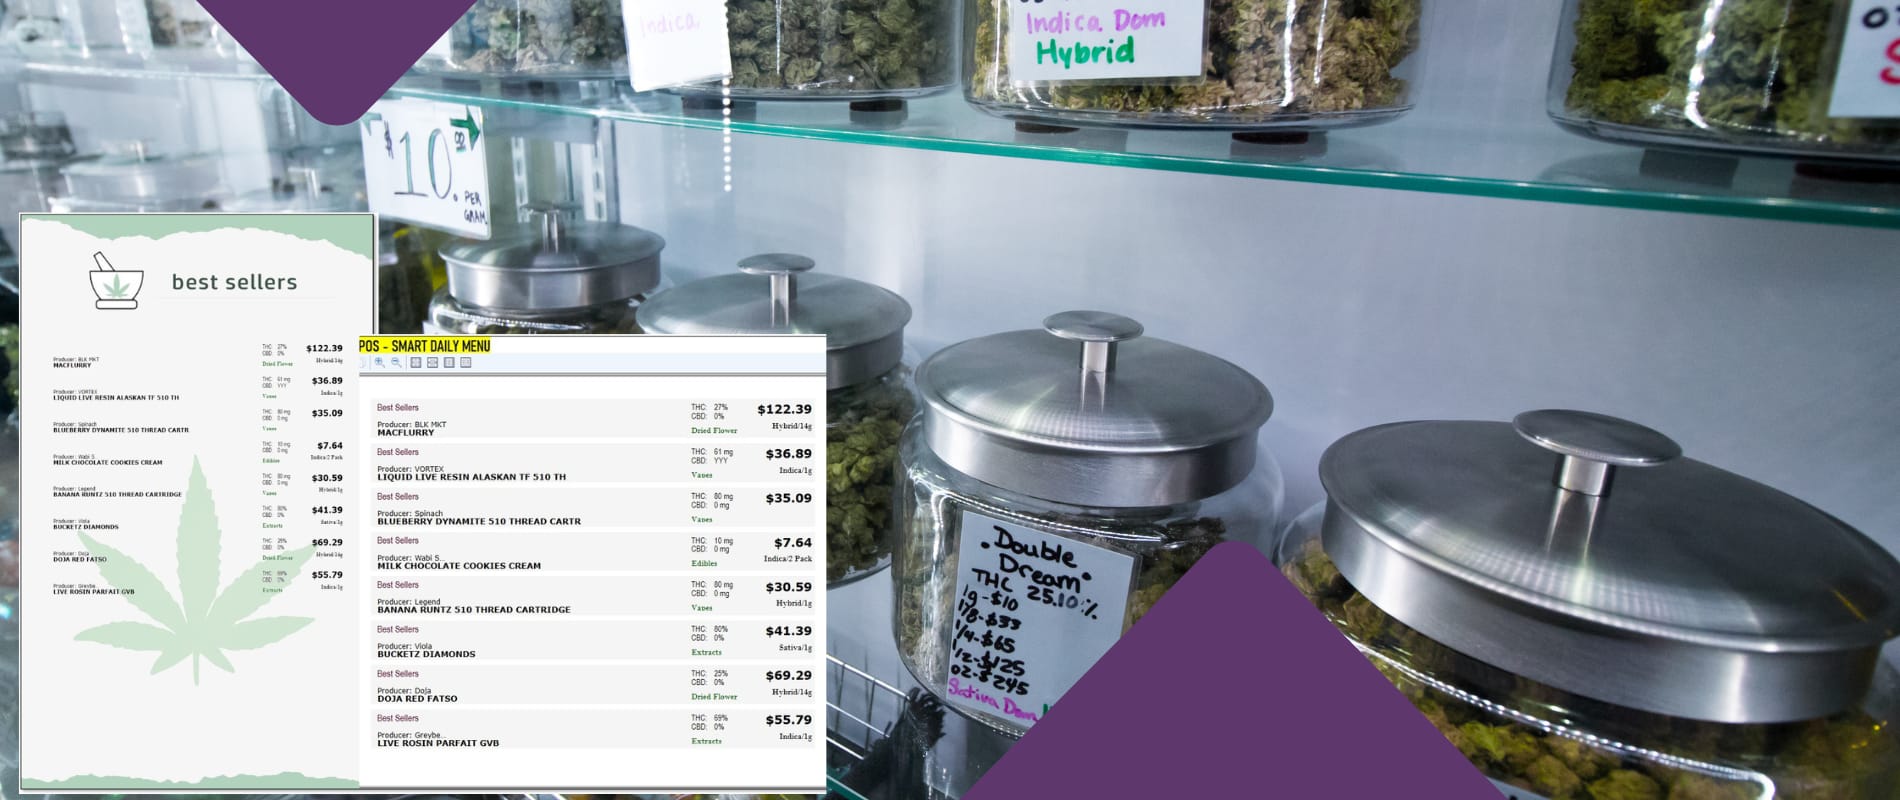 Taking a Page from Restaurants: Introducing the paper Menu for Cannabis